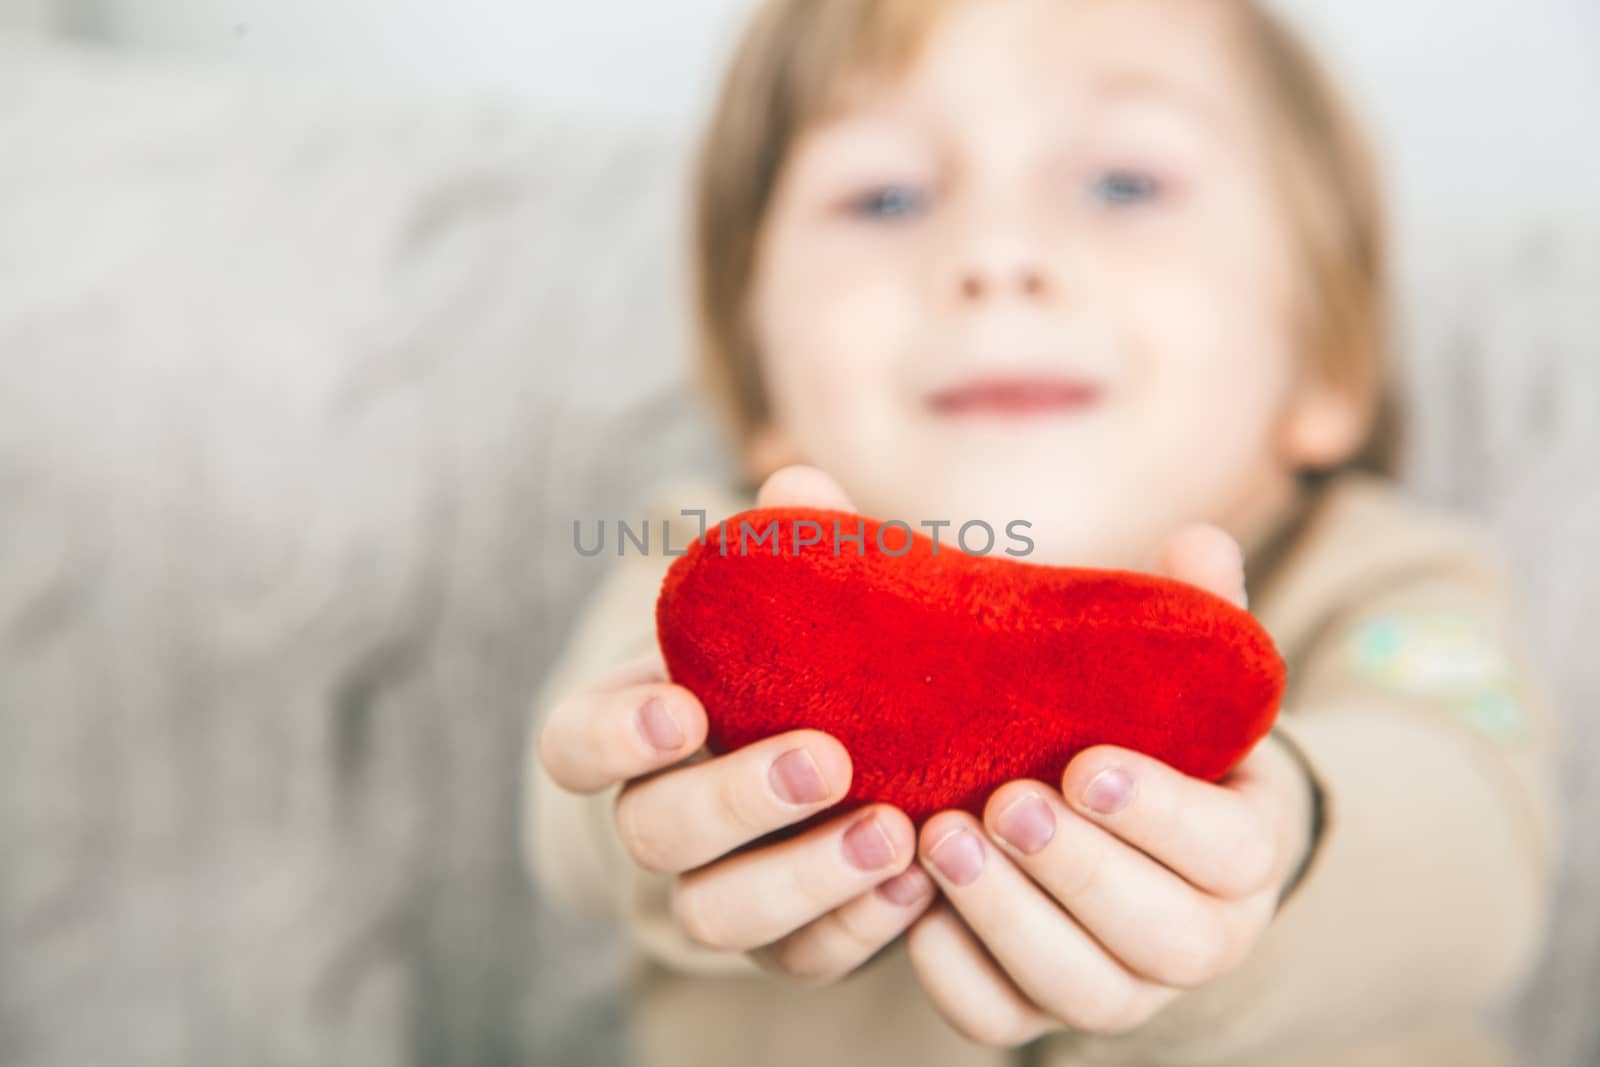 Cute young boy with a red heart in his hands